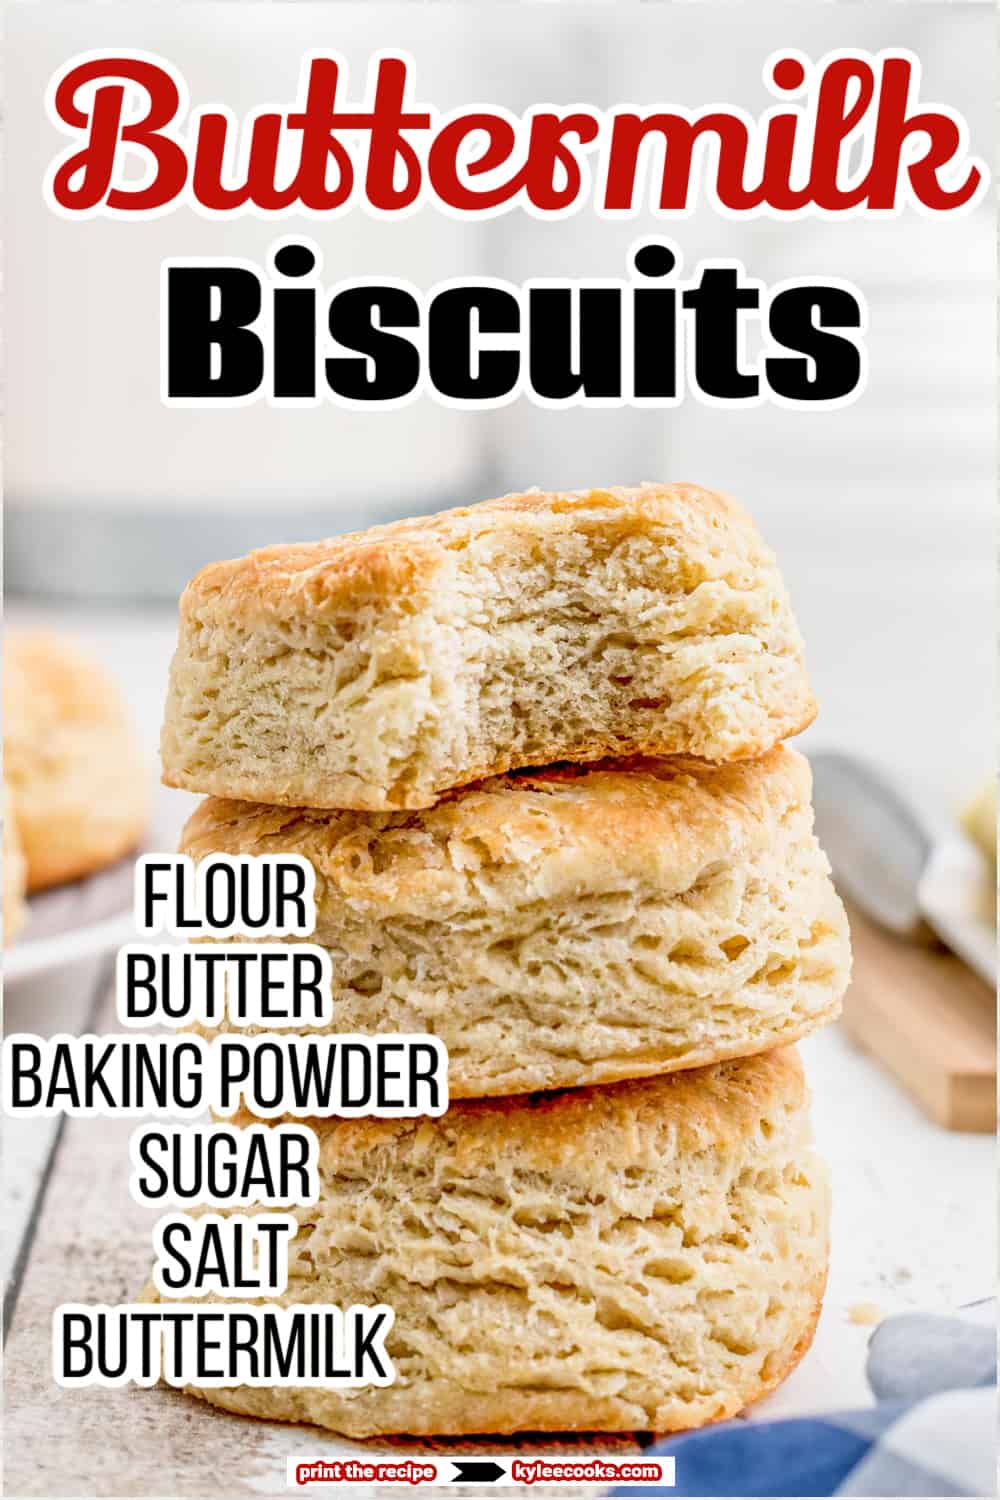 stacked buttermilk biscuits being brushed with butter, with recipe name and ingredients overlaid in text.